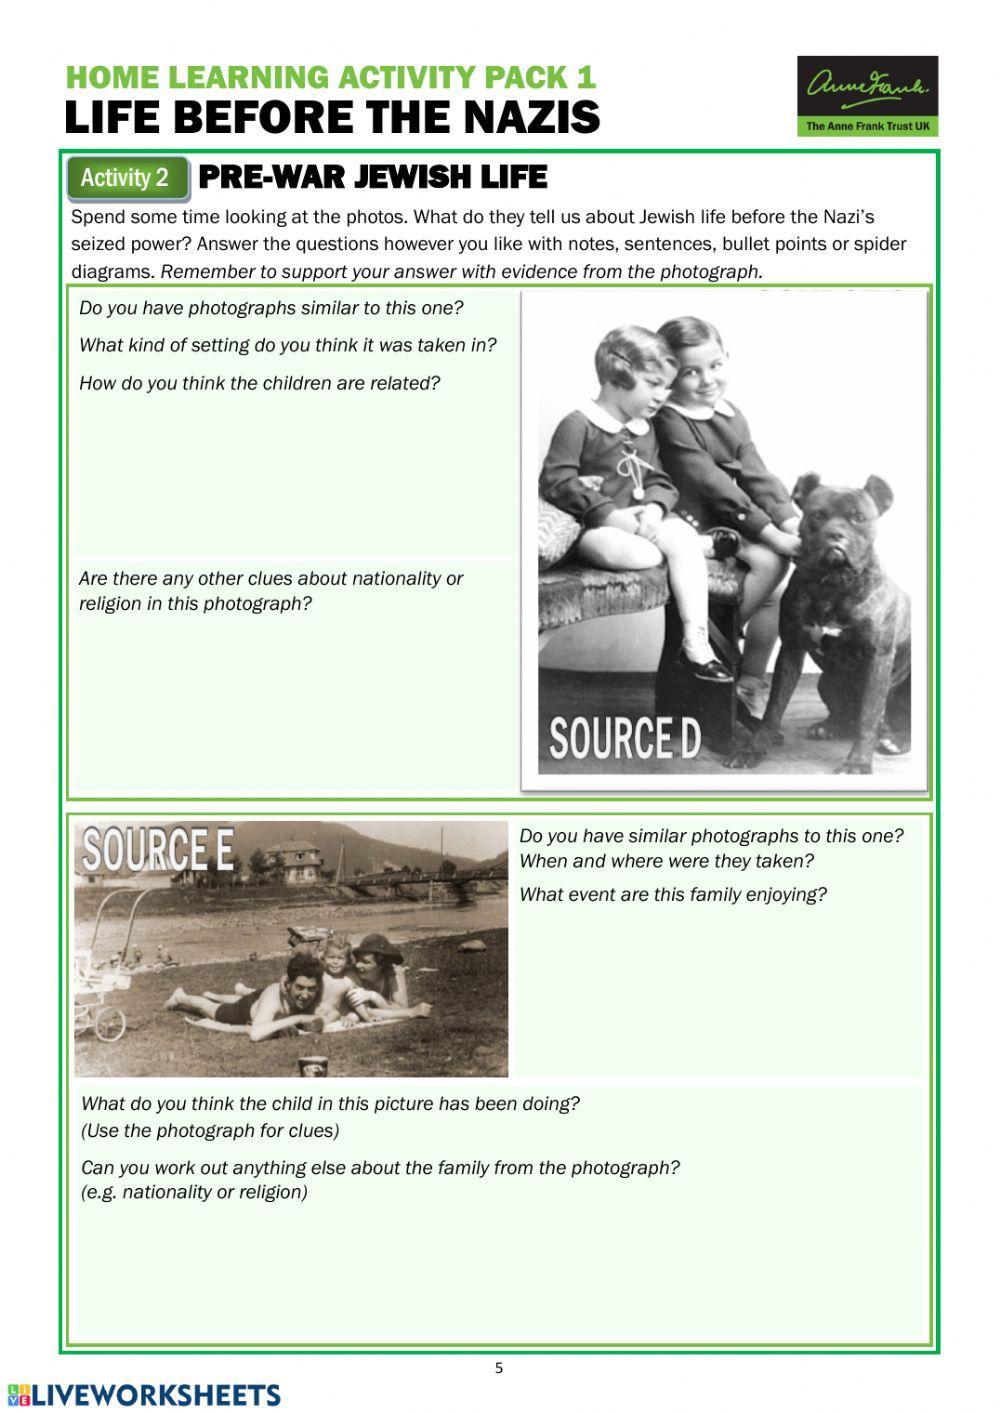 Home Learning Activity Pack 1 - LIFE BEFORE THE NAZIS